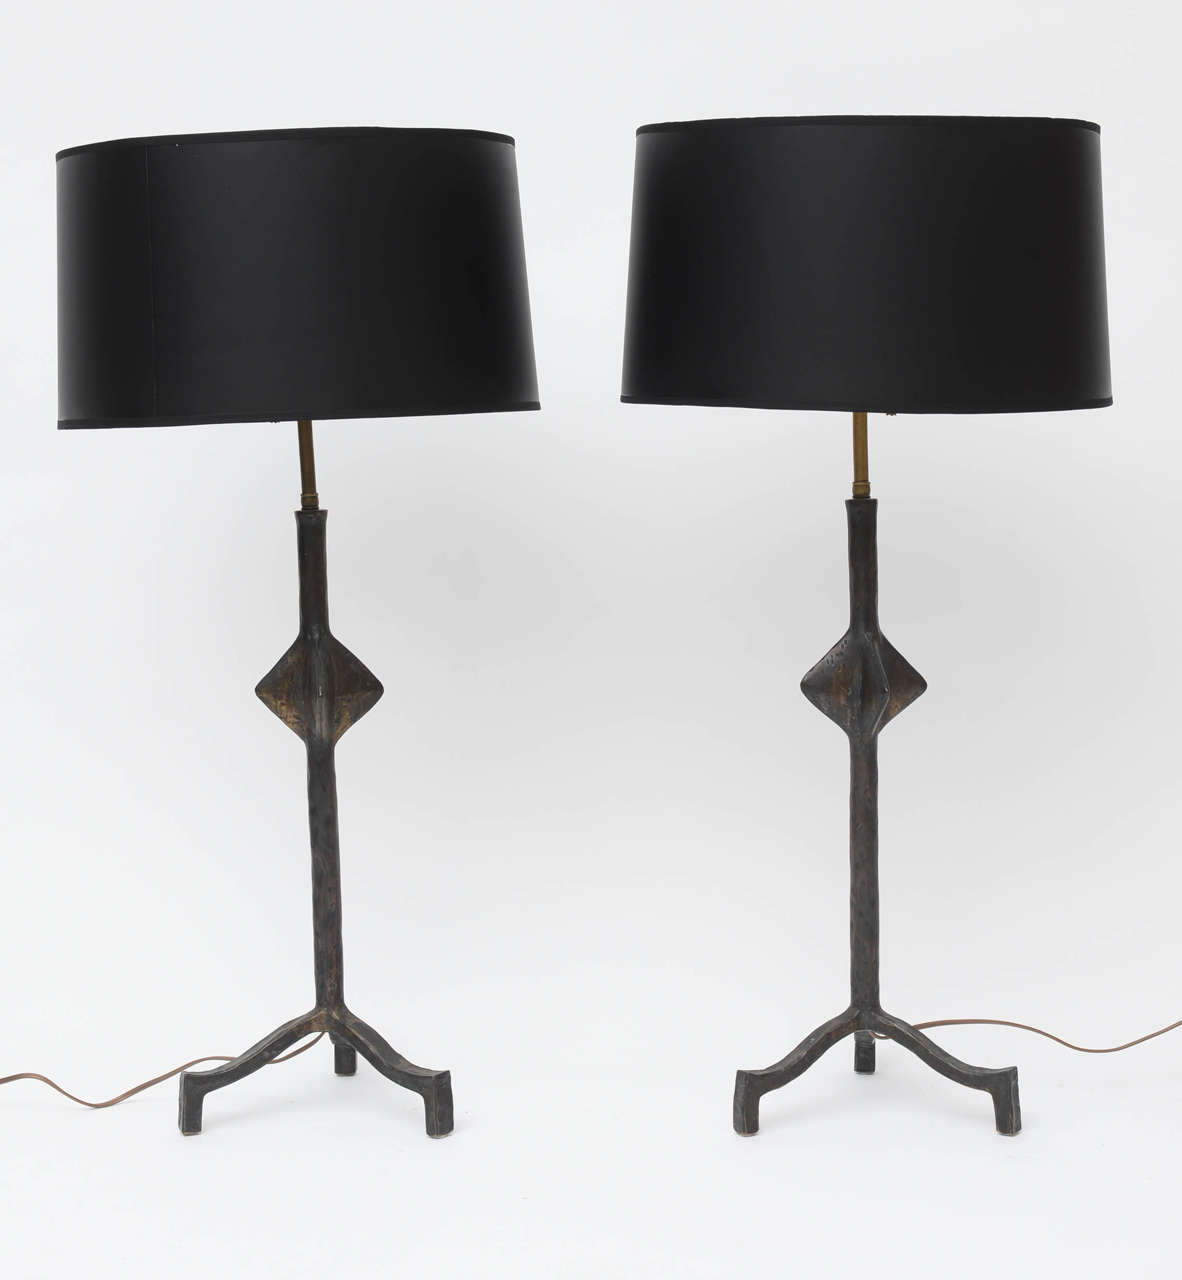 Amazing sculptural bronze table lamps after a design by Diego Giacometti.